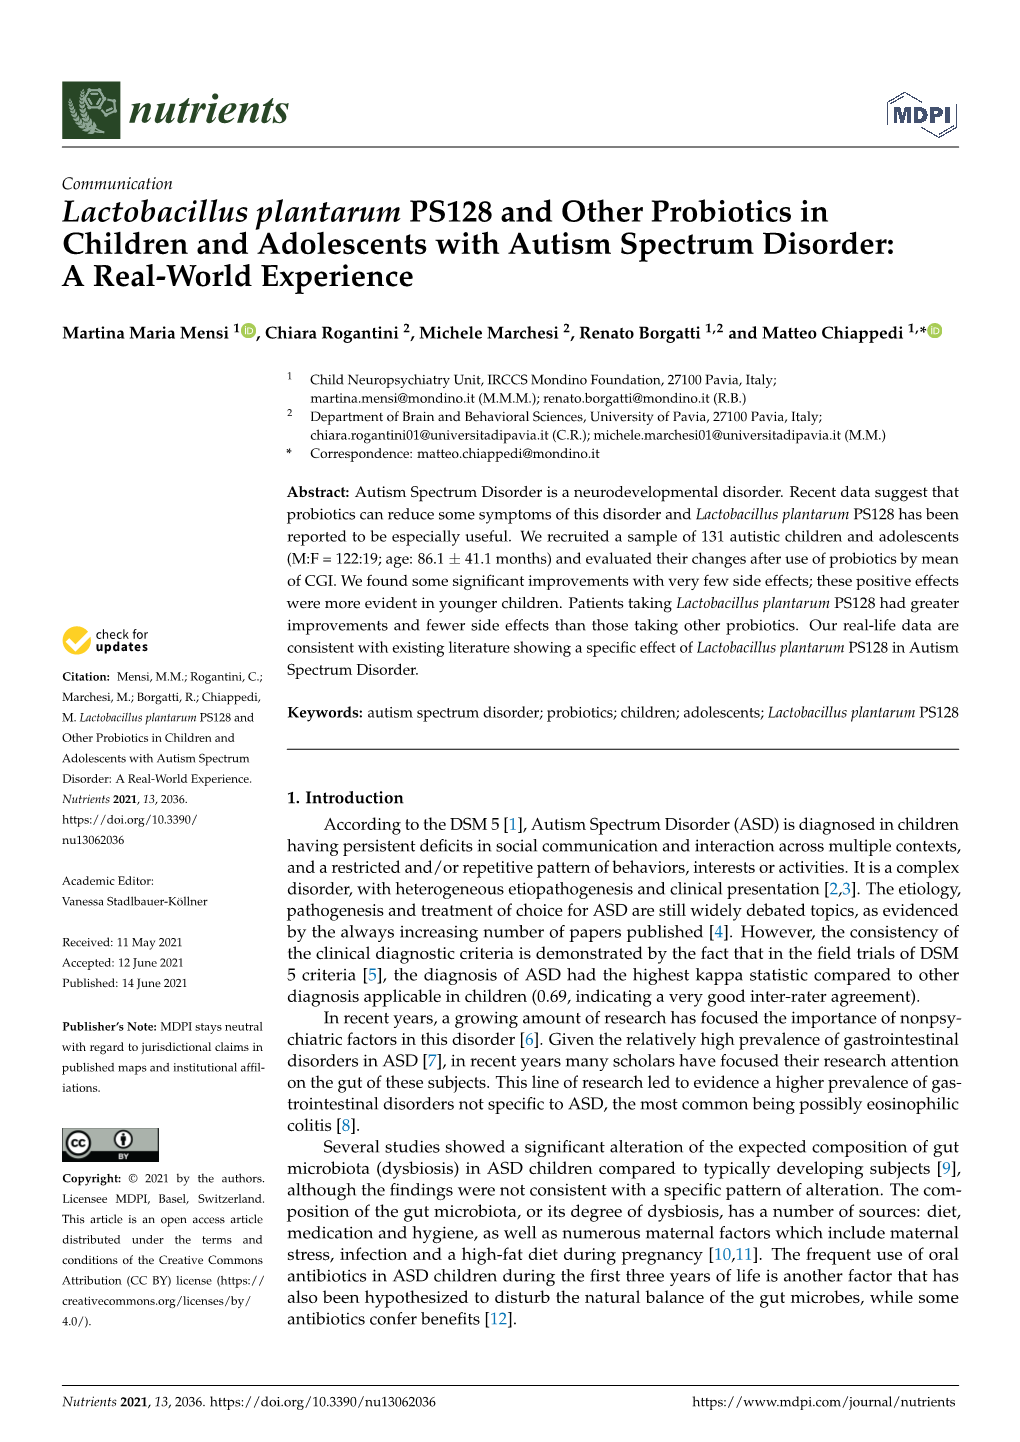 Lactobacillus Plantarum PS128 and Other Probiotics in Children and Adolescents with Autism Spectrum Disorder: a Real-World Experience